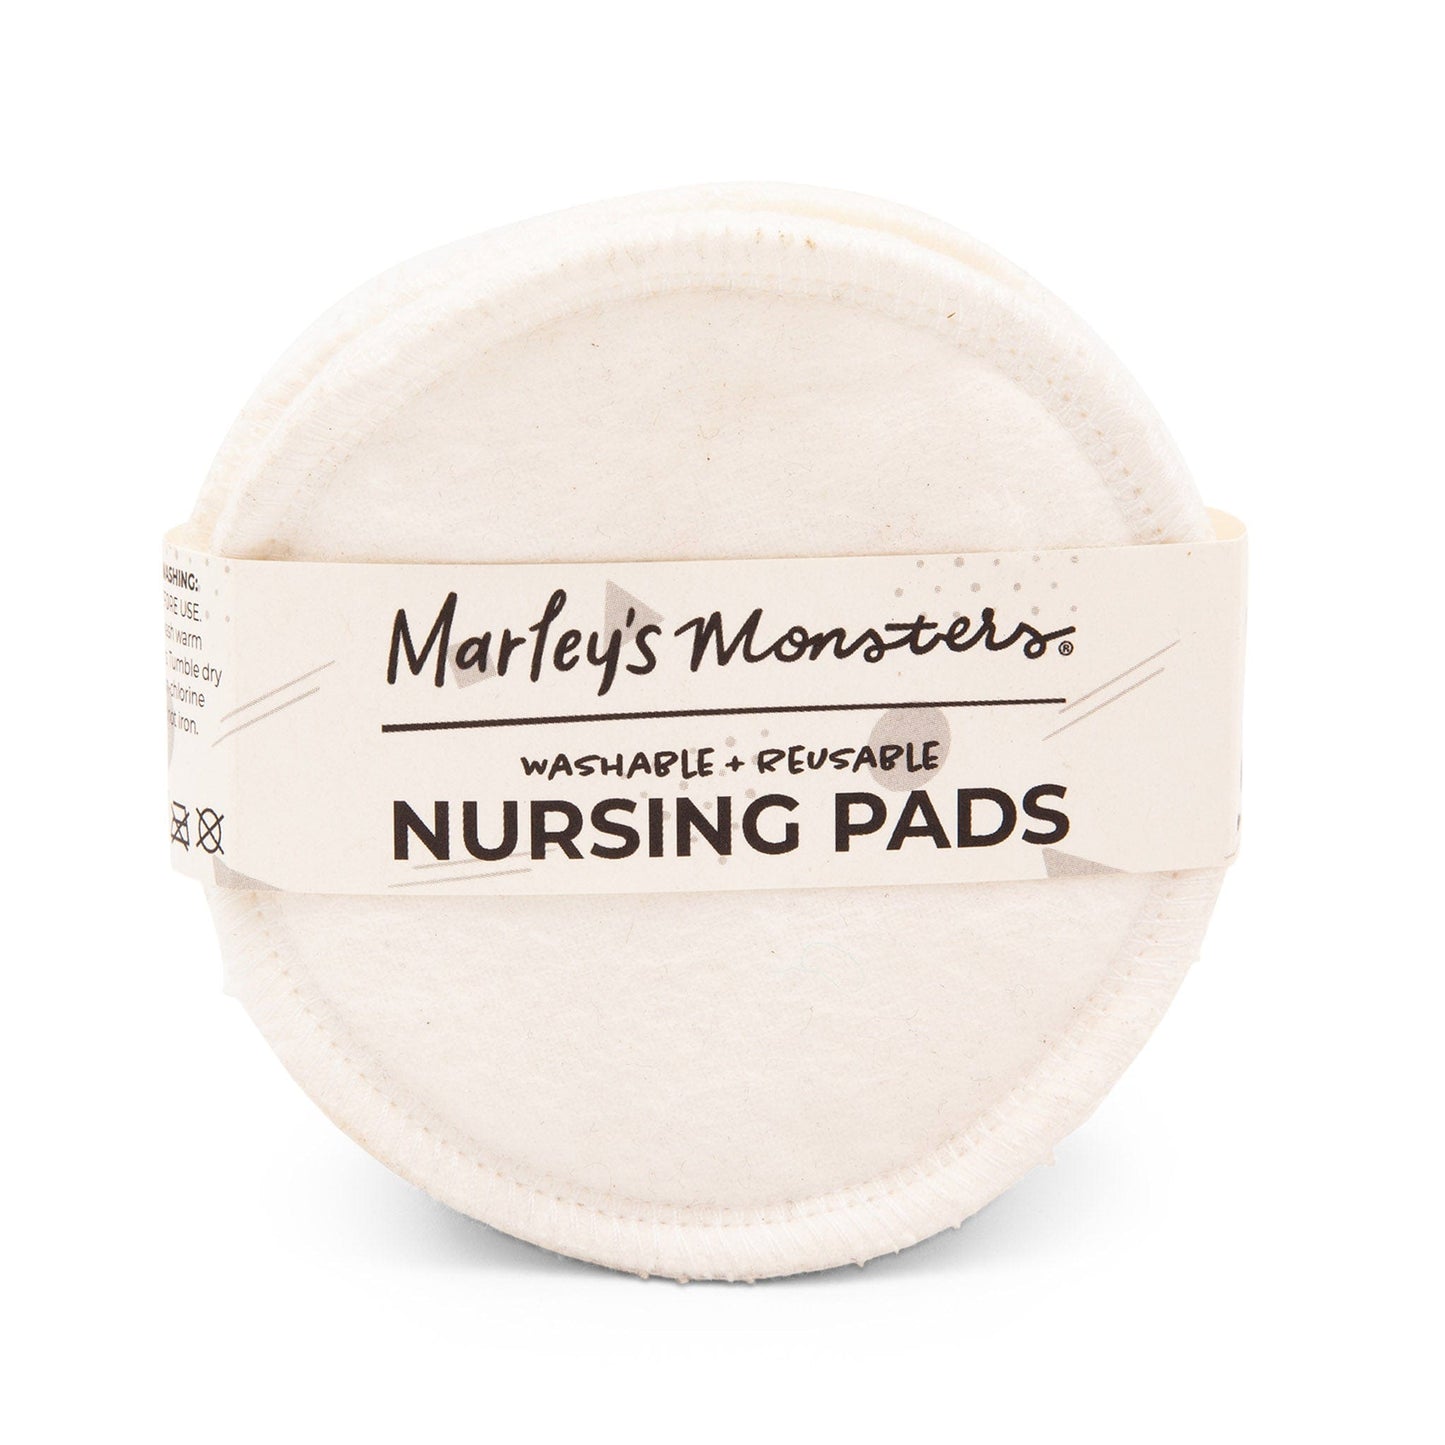 Marley's Monsters Nursing Pads Washable & Reusable Nursing Pads - 3 Pairs - Marley's Monsters